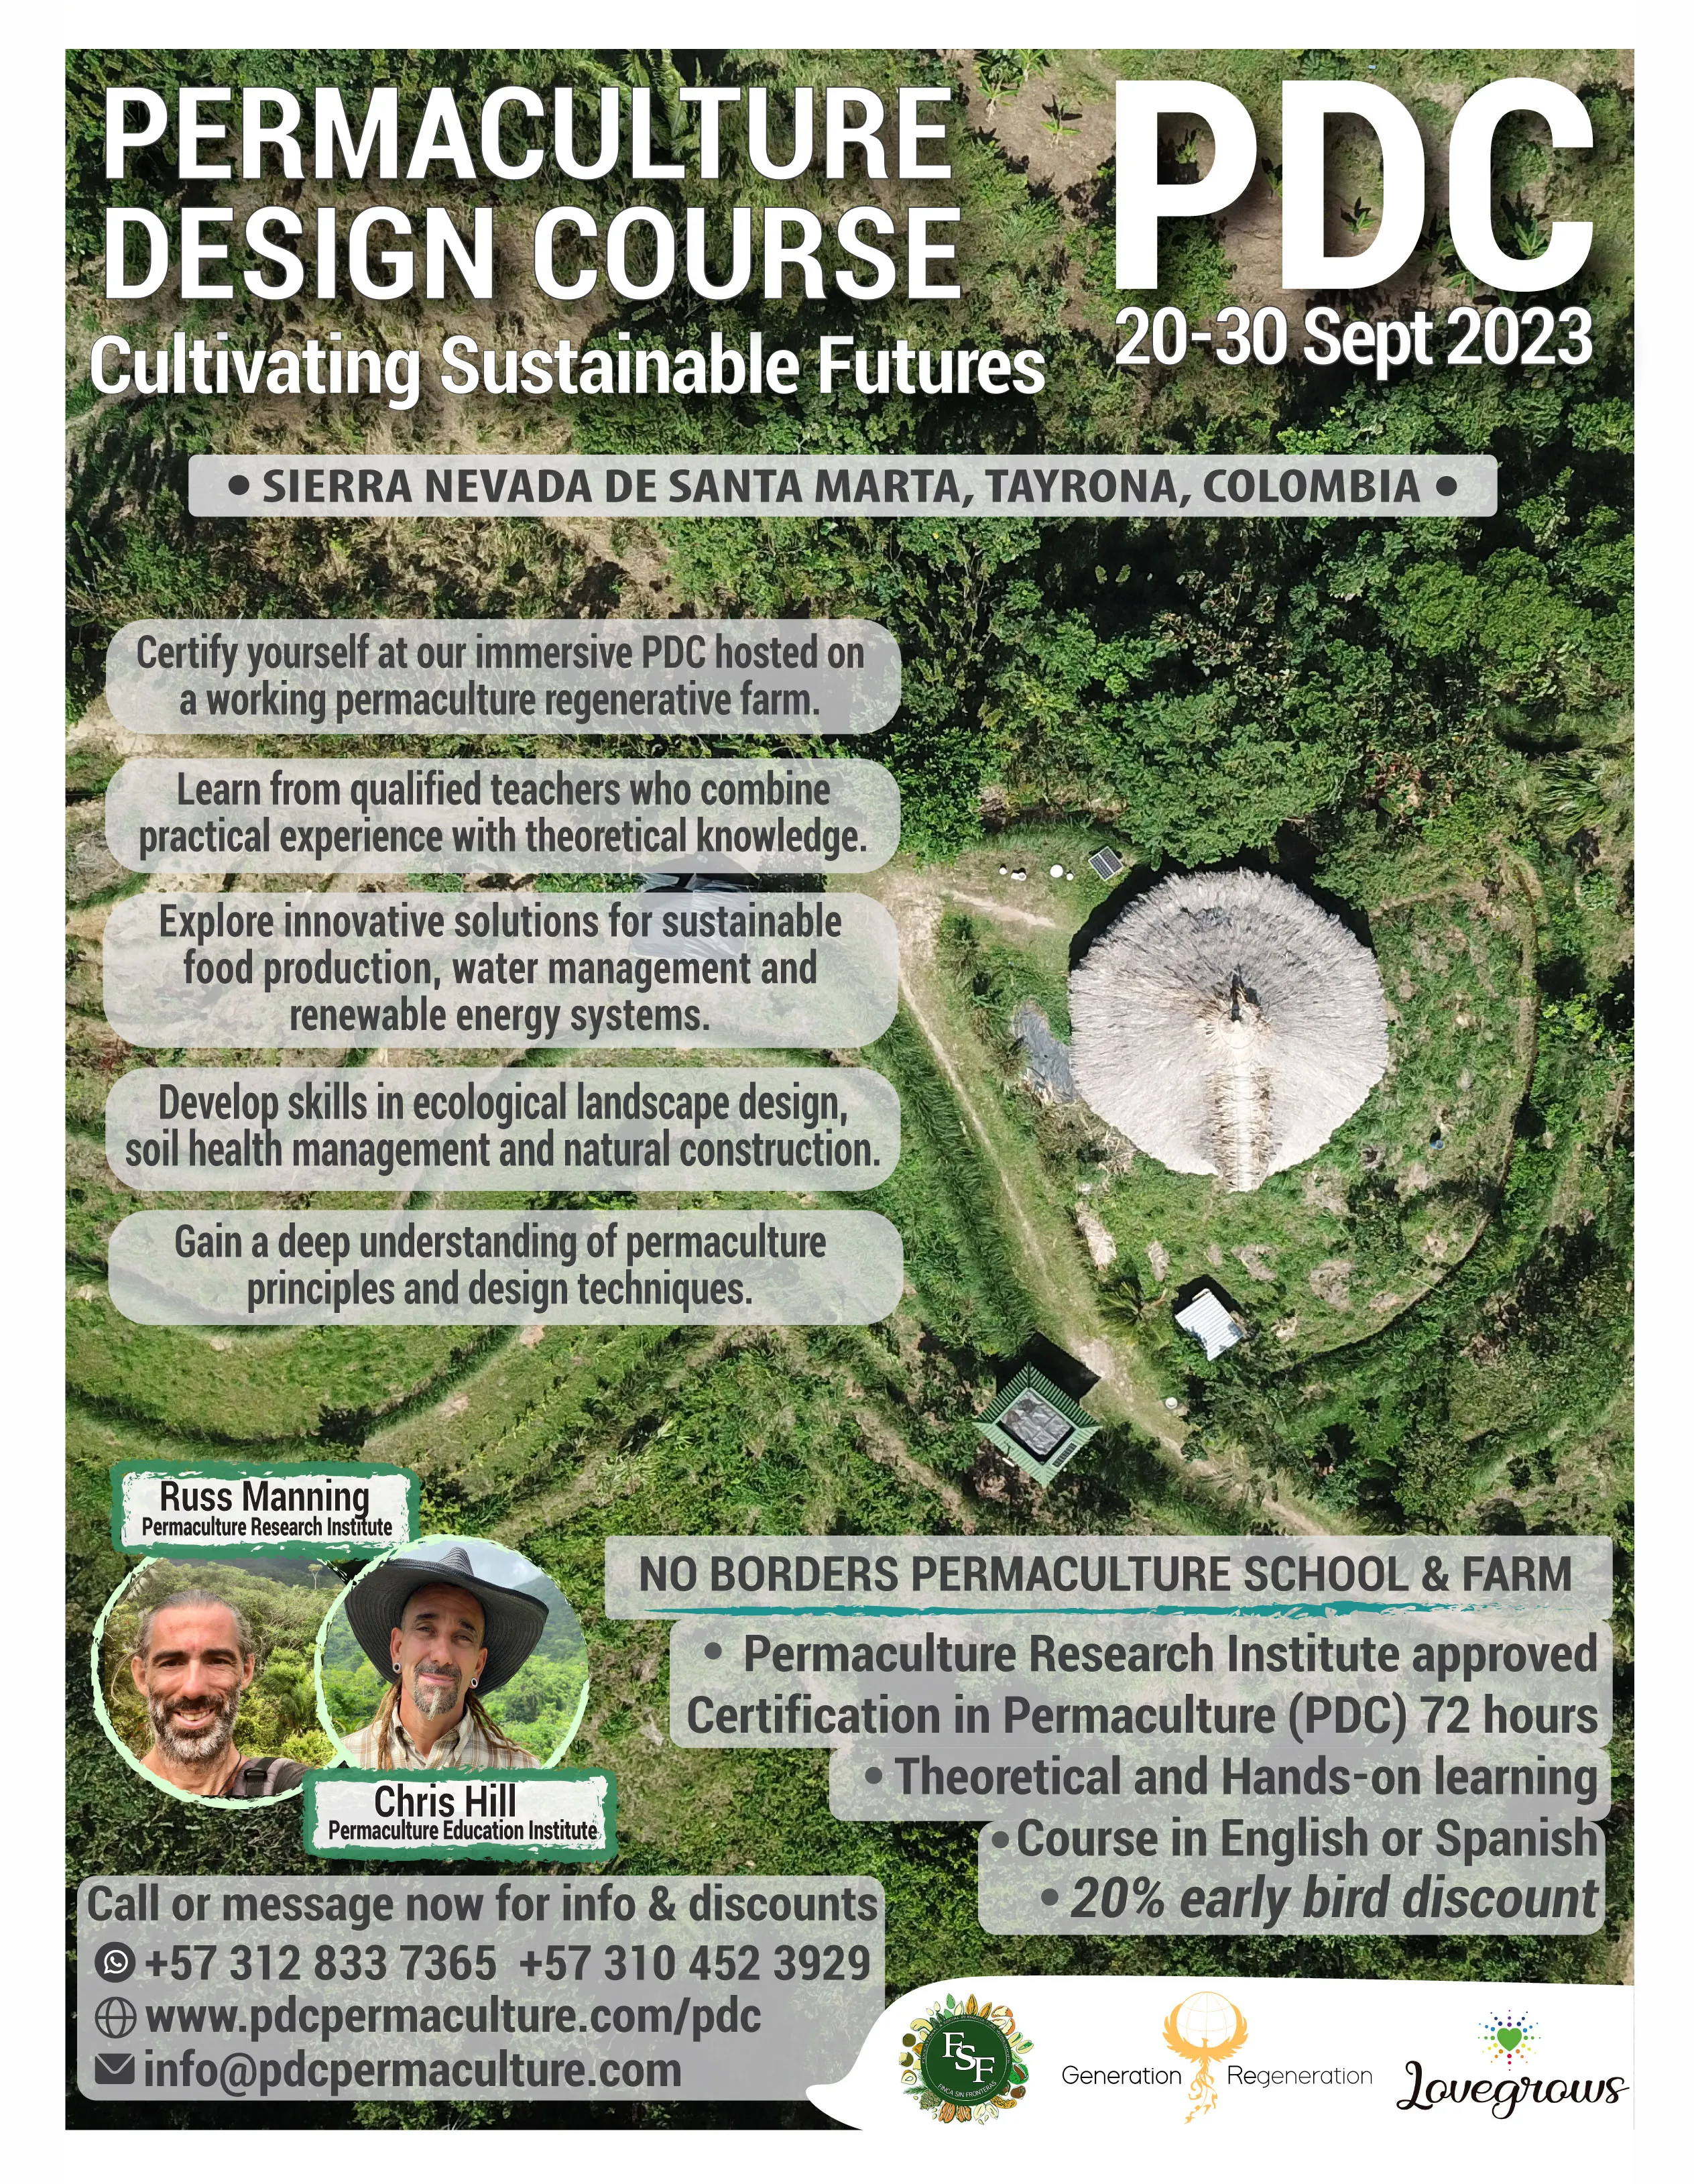 Permaculture Design Course PDC 2023 Colombia